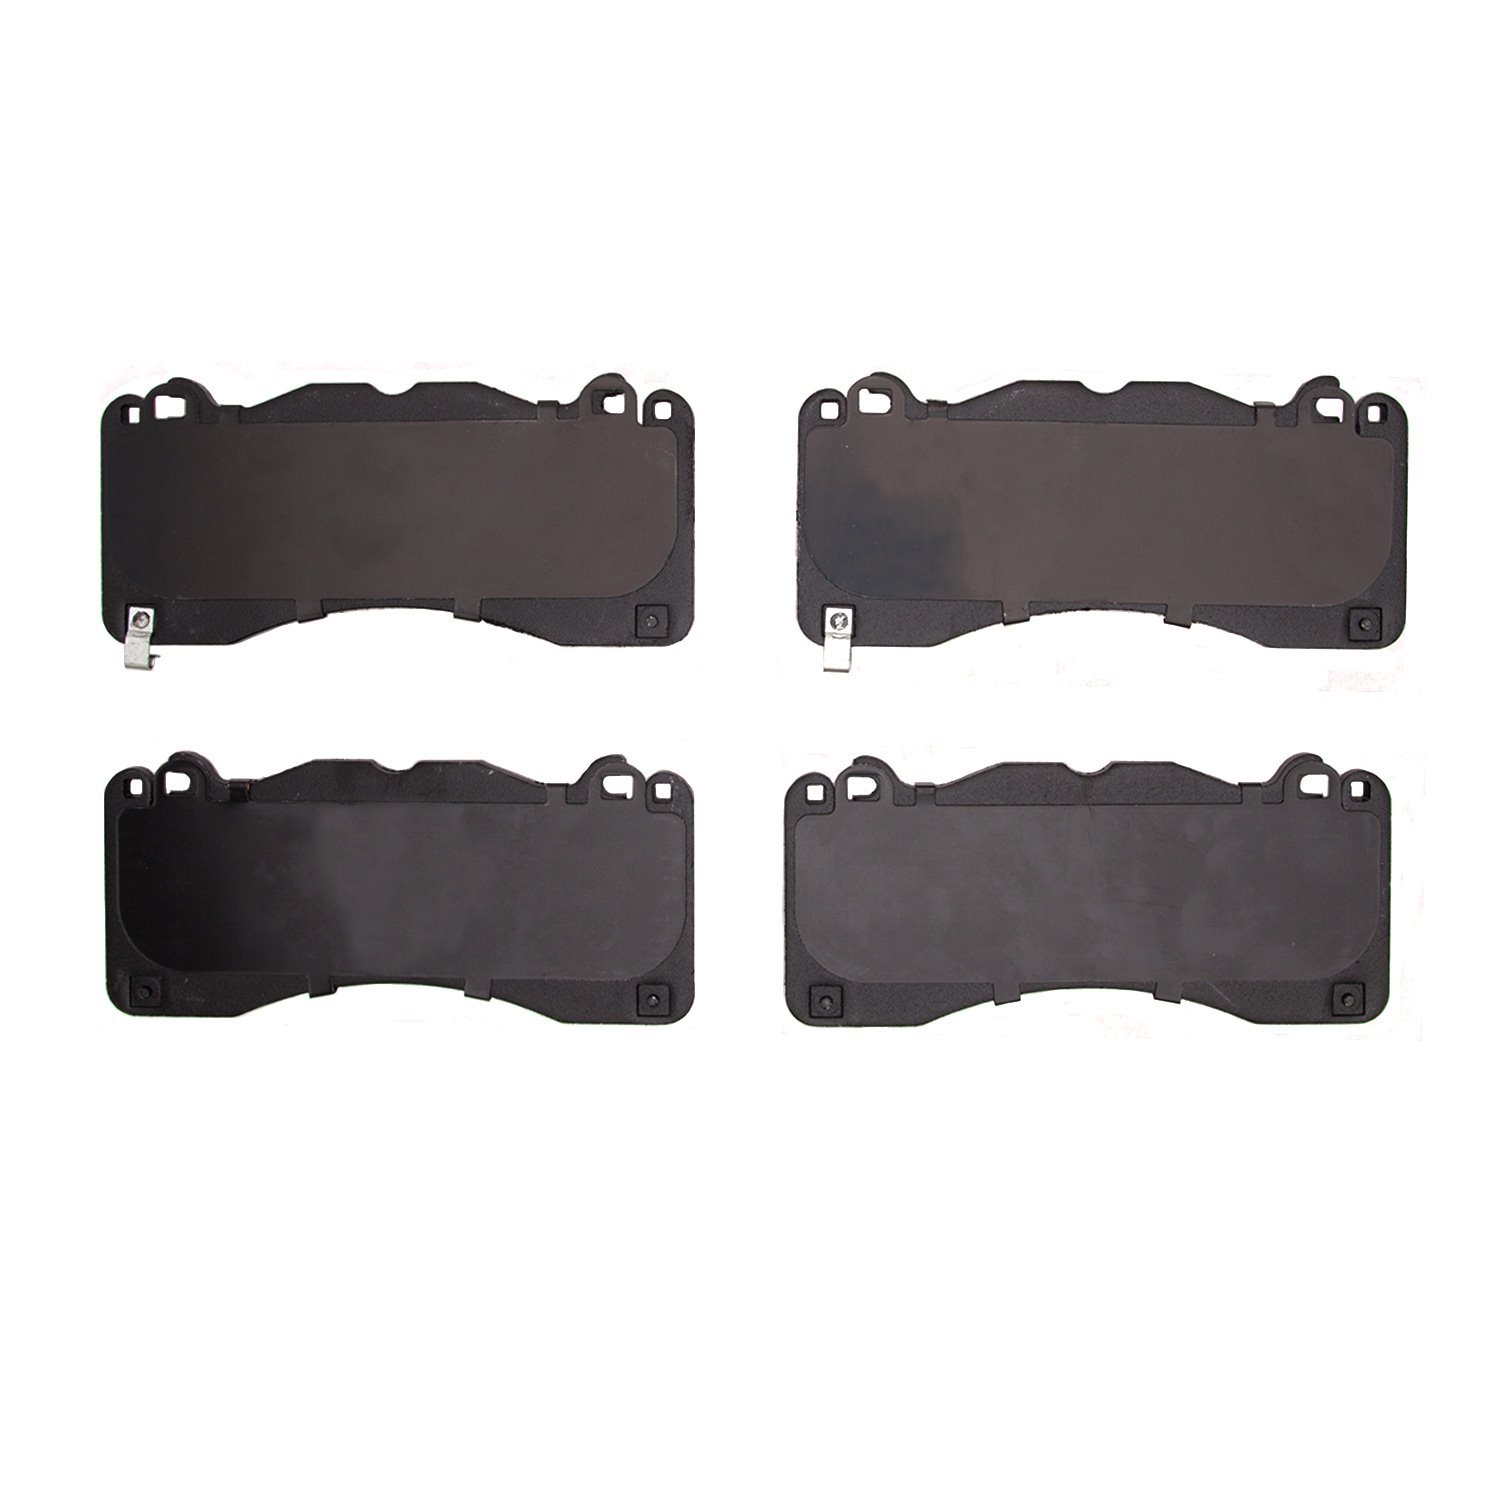 1551-1792-00 5000 Advanced Low-Metallic Brake Pads, Fits Select Ford/Lincoln/Mercury/Mazda, Position: Front